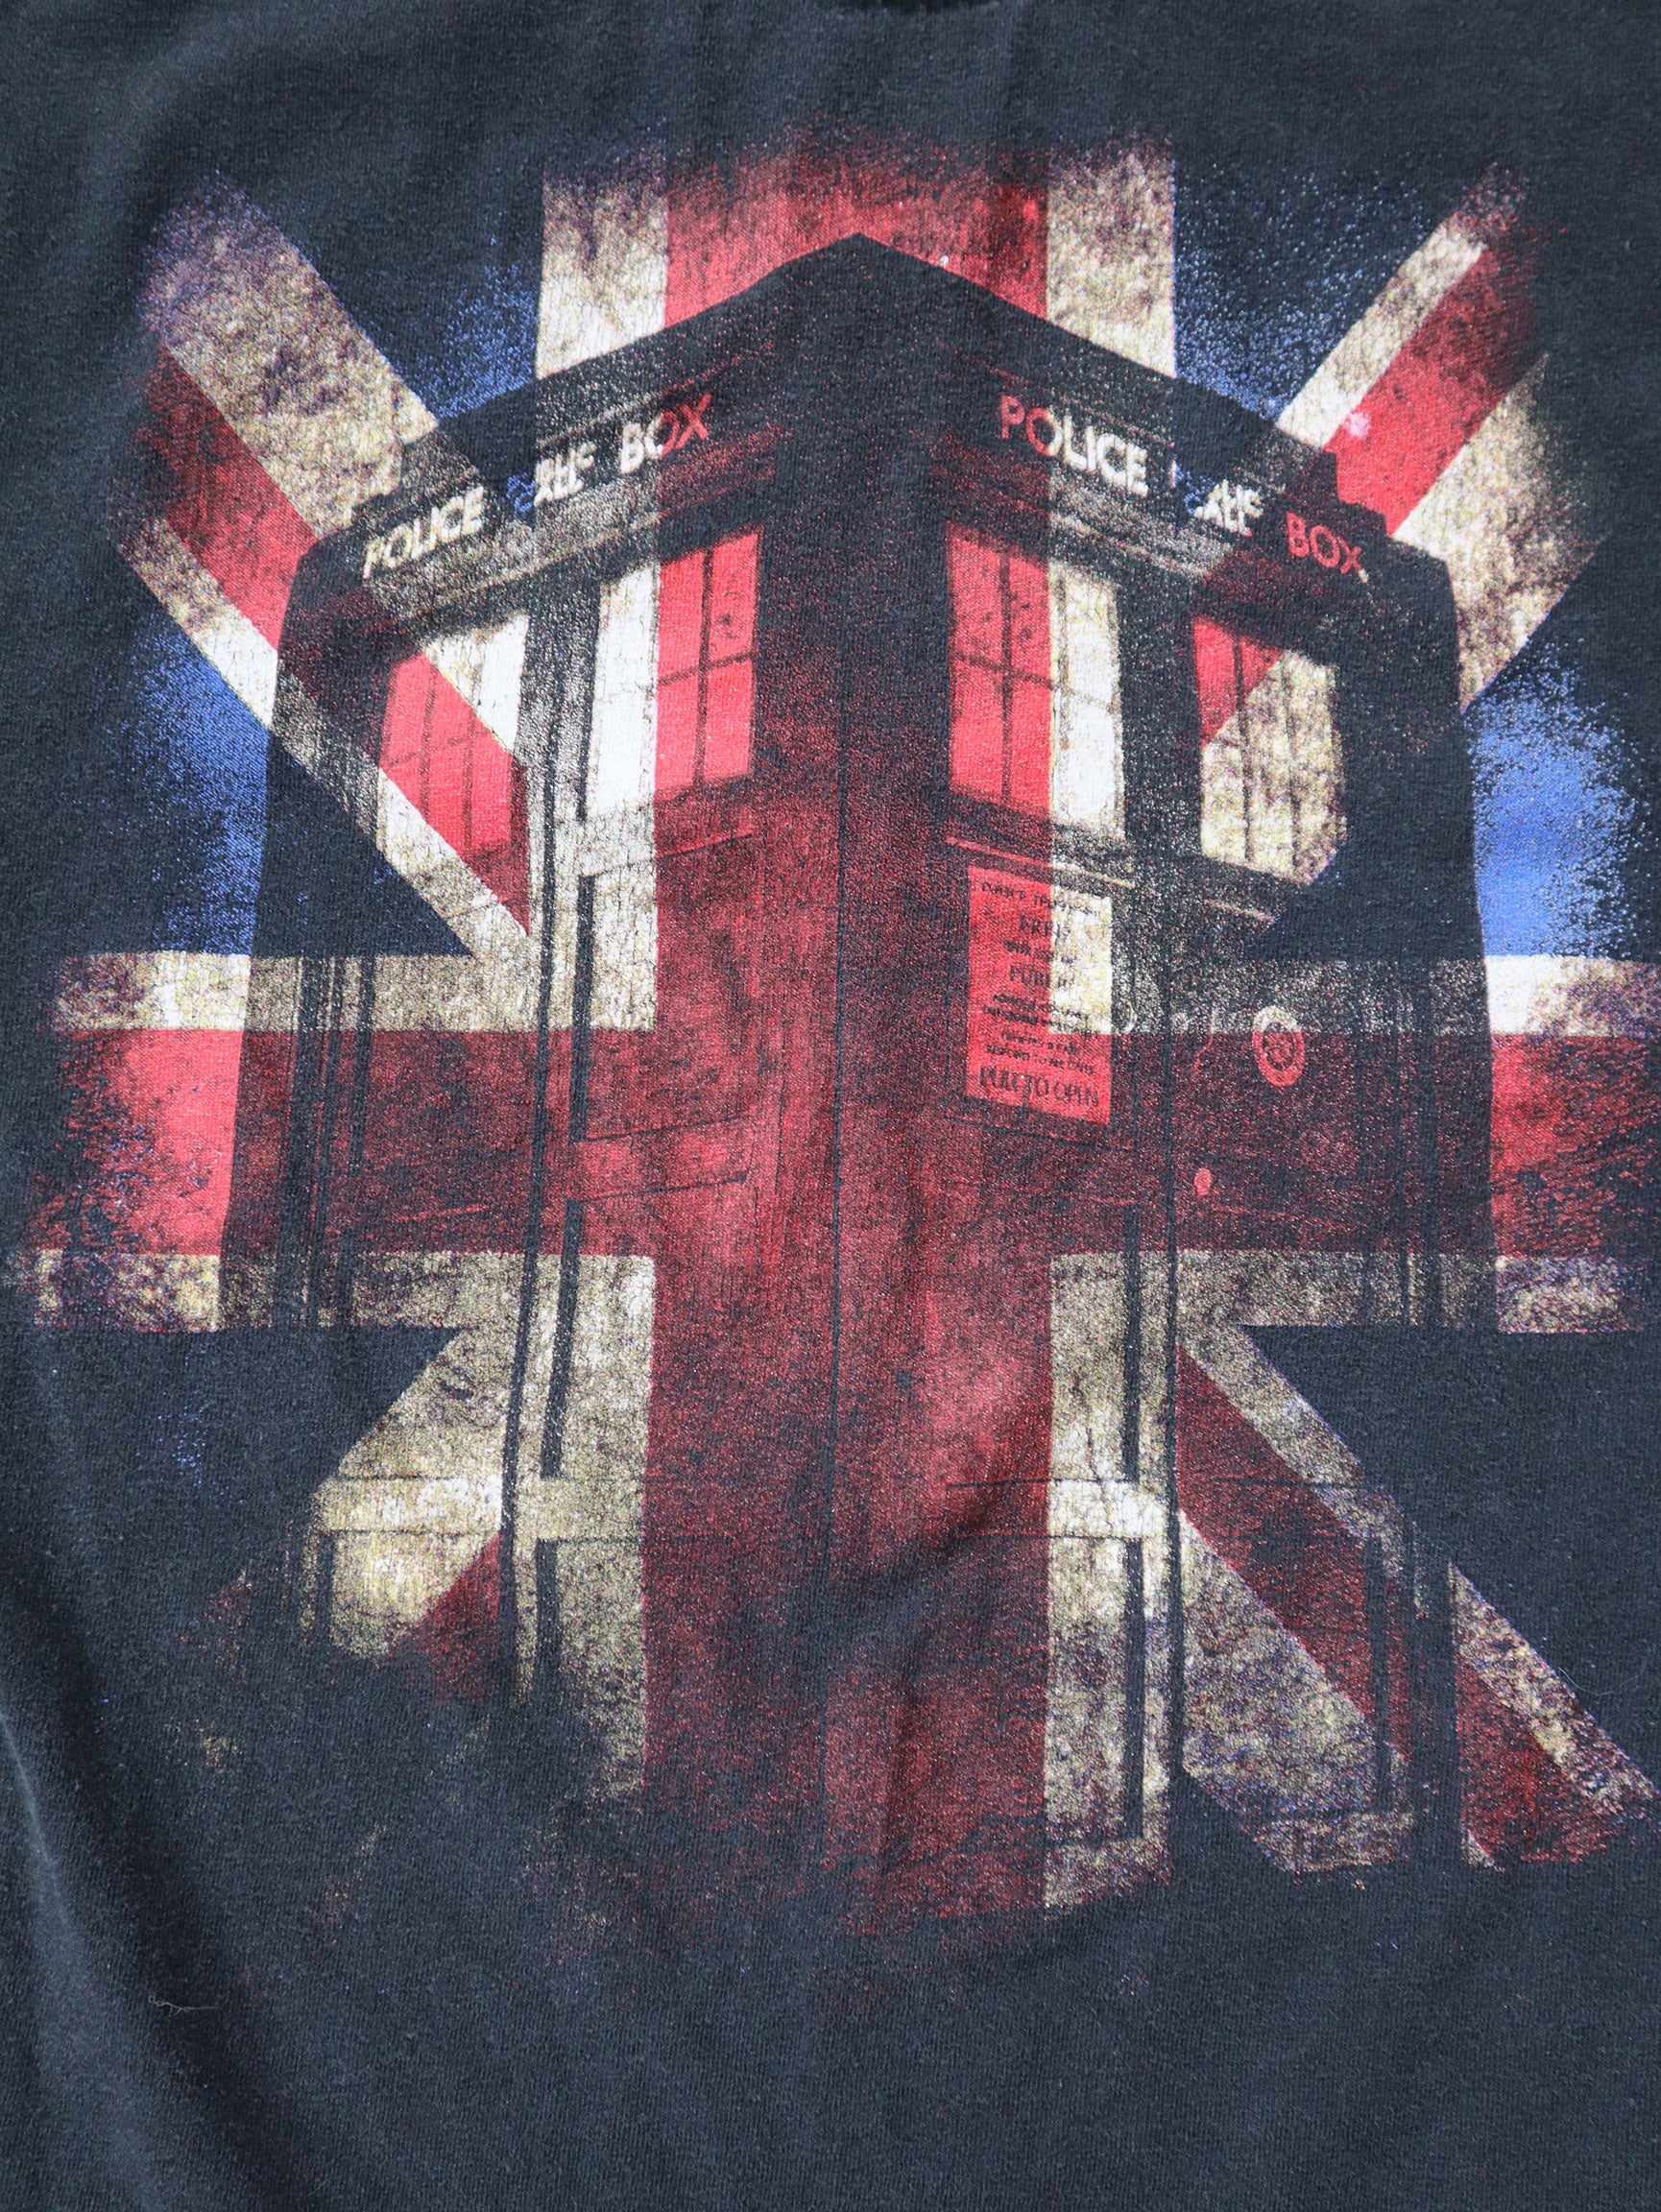 Dr. Who Graphic Tee